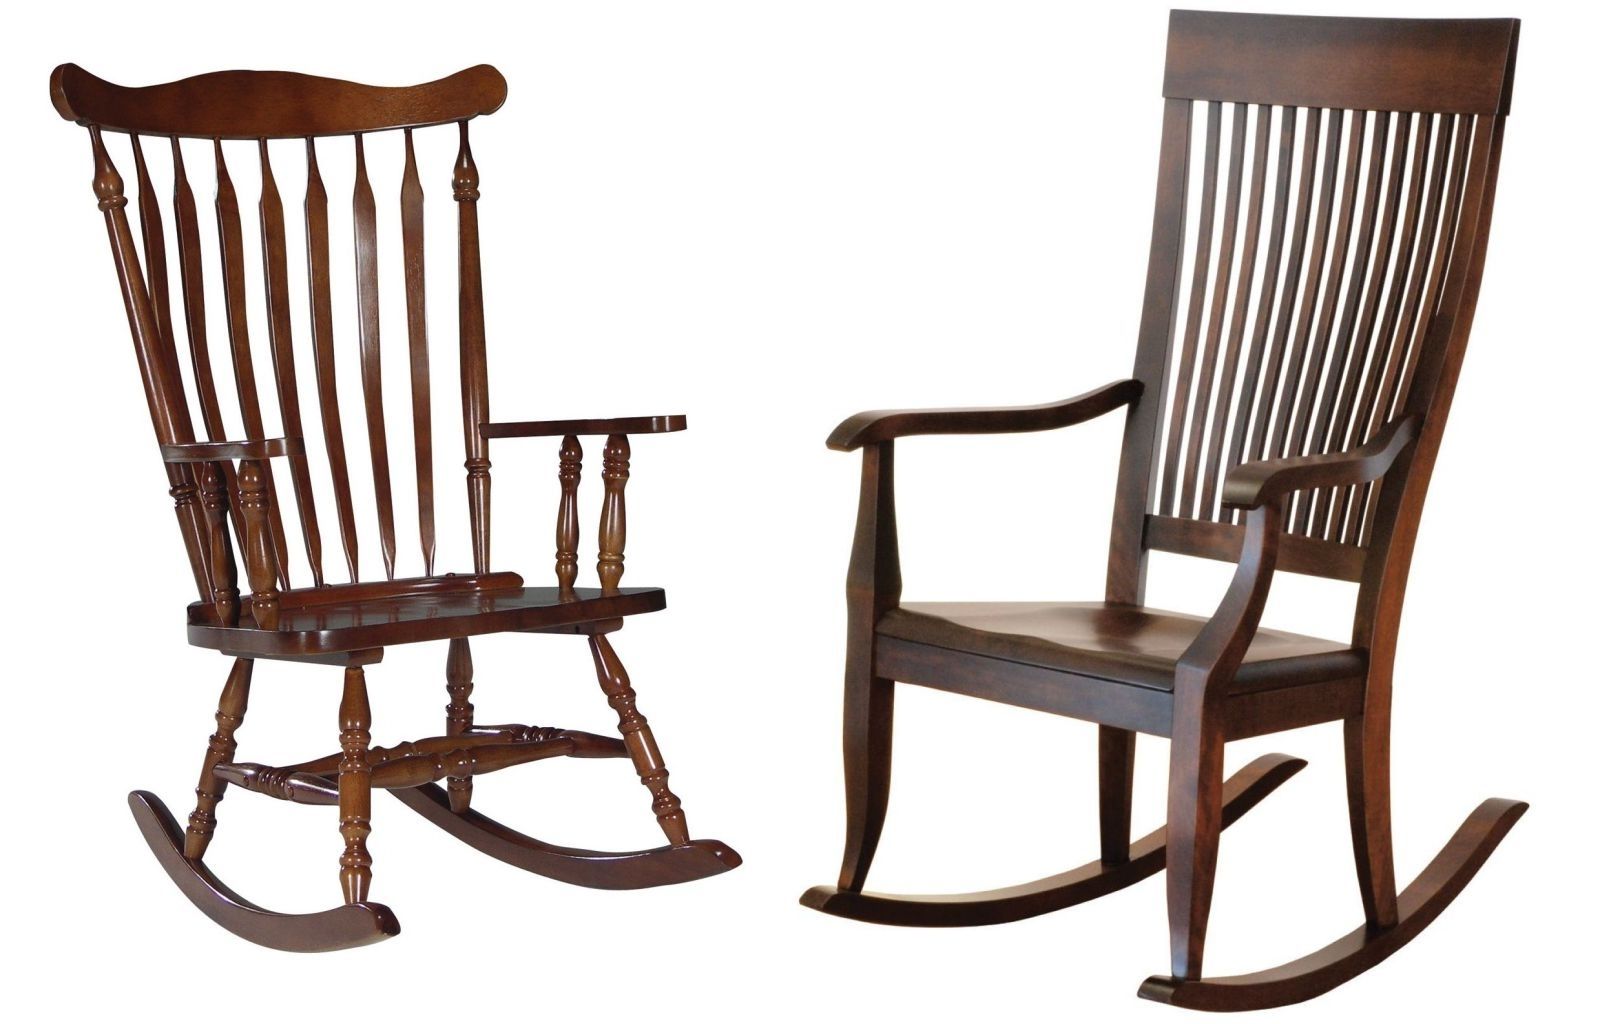 Outside Rocking Chairs For Sale Good Rocking Chairs Off With Old Fashioned Rocking Chairs (View 10 of 15)